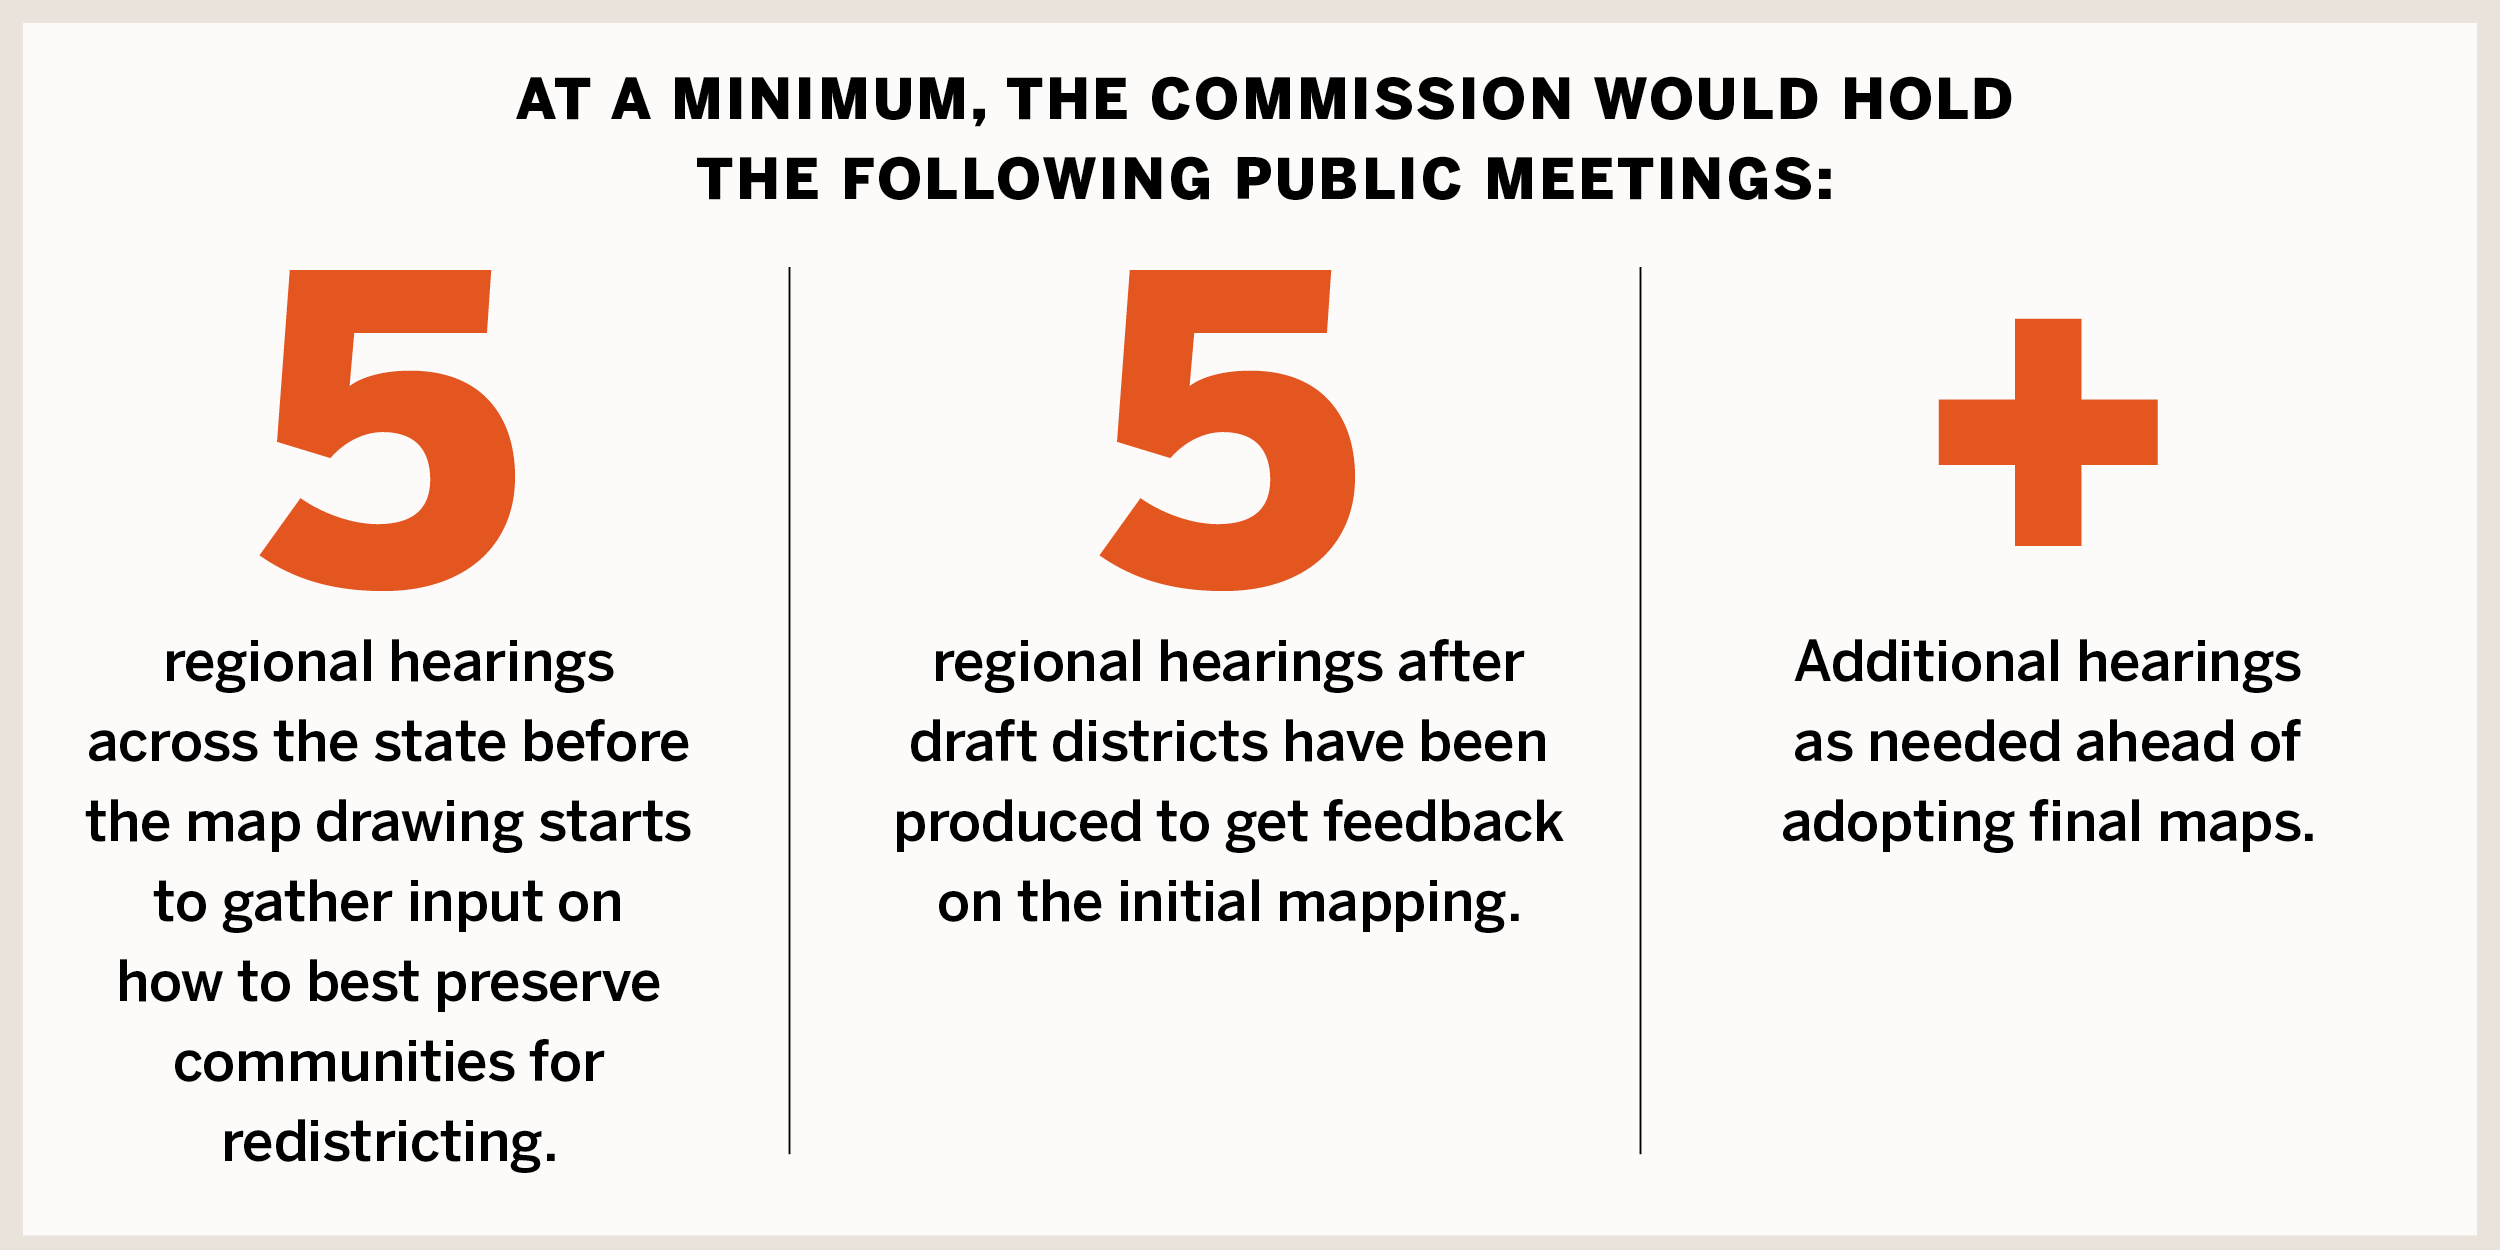 5 regional hearings across the state before the map drawing starts in order to gather input on how to best preserve communities for redistricting. 5 regional hearings after draft maps have been drawn to get feedback on the initial attempts. Additional hearings as needed as new iterations are produced ahead of unveiling final maps.